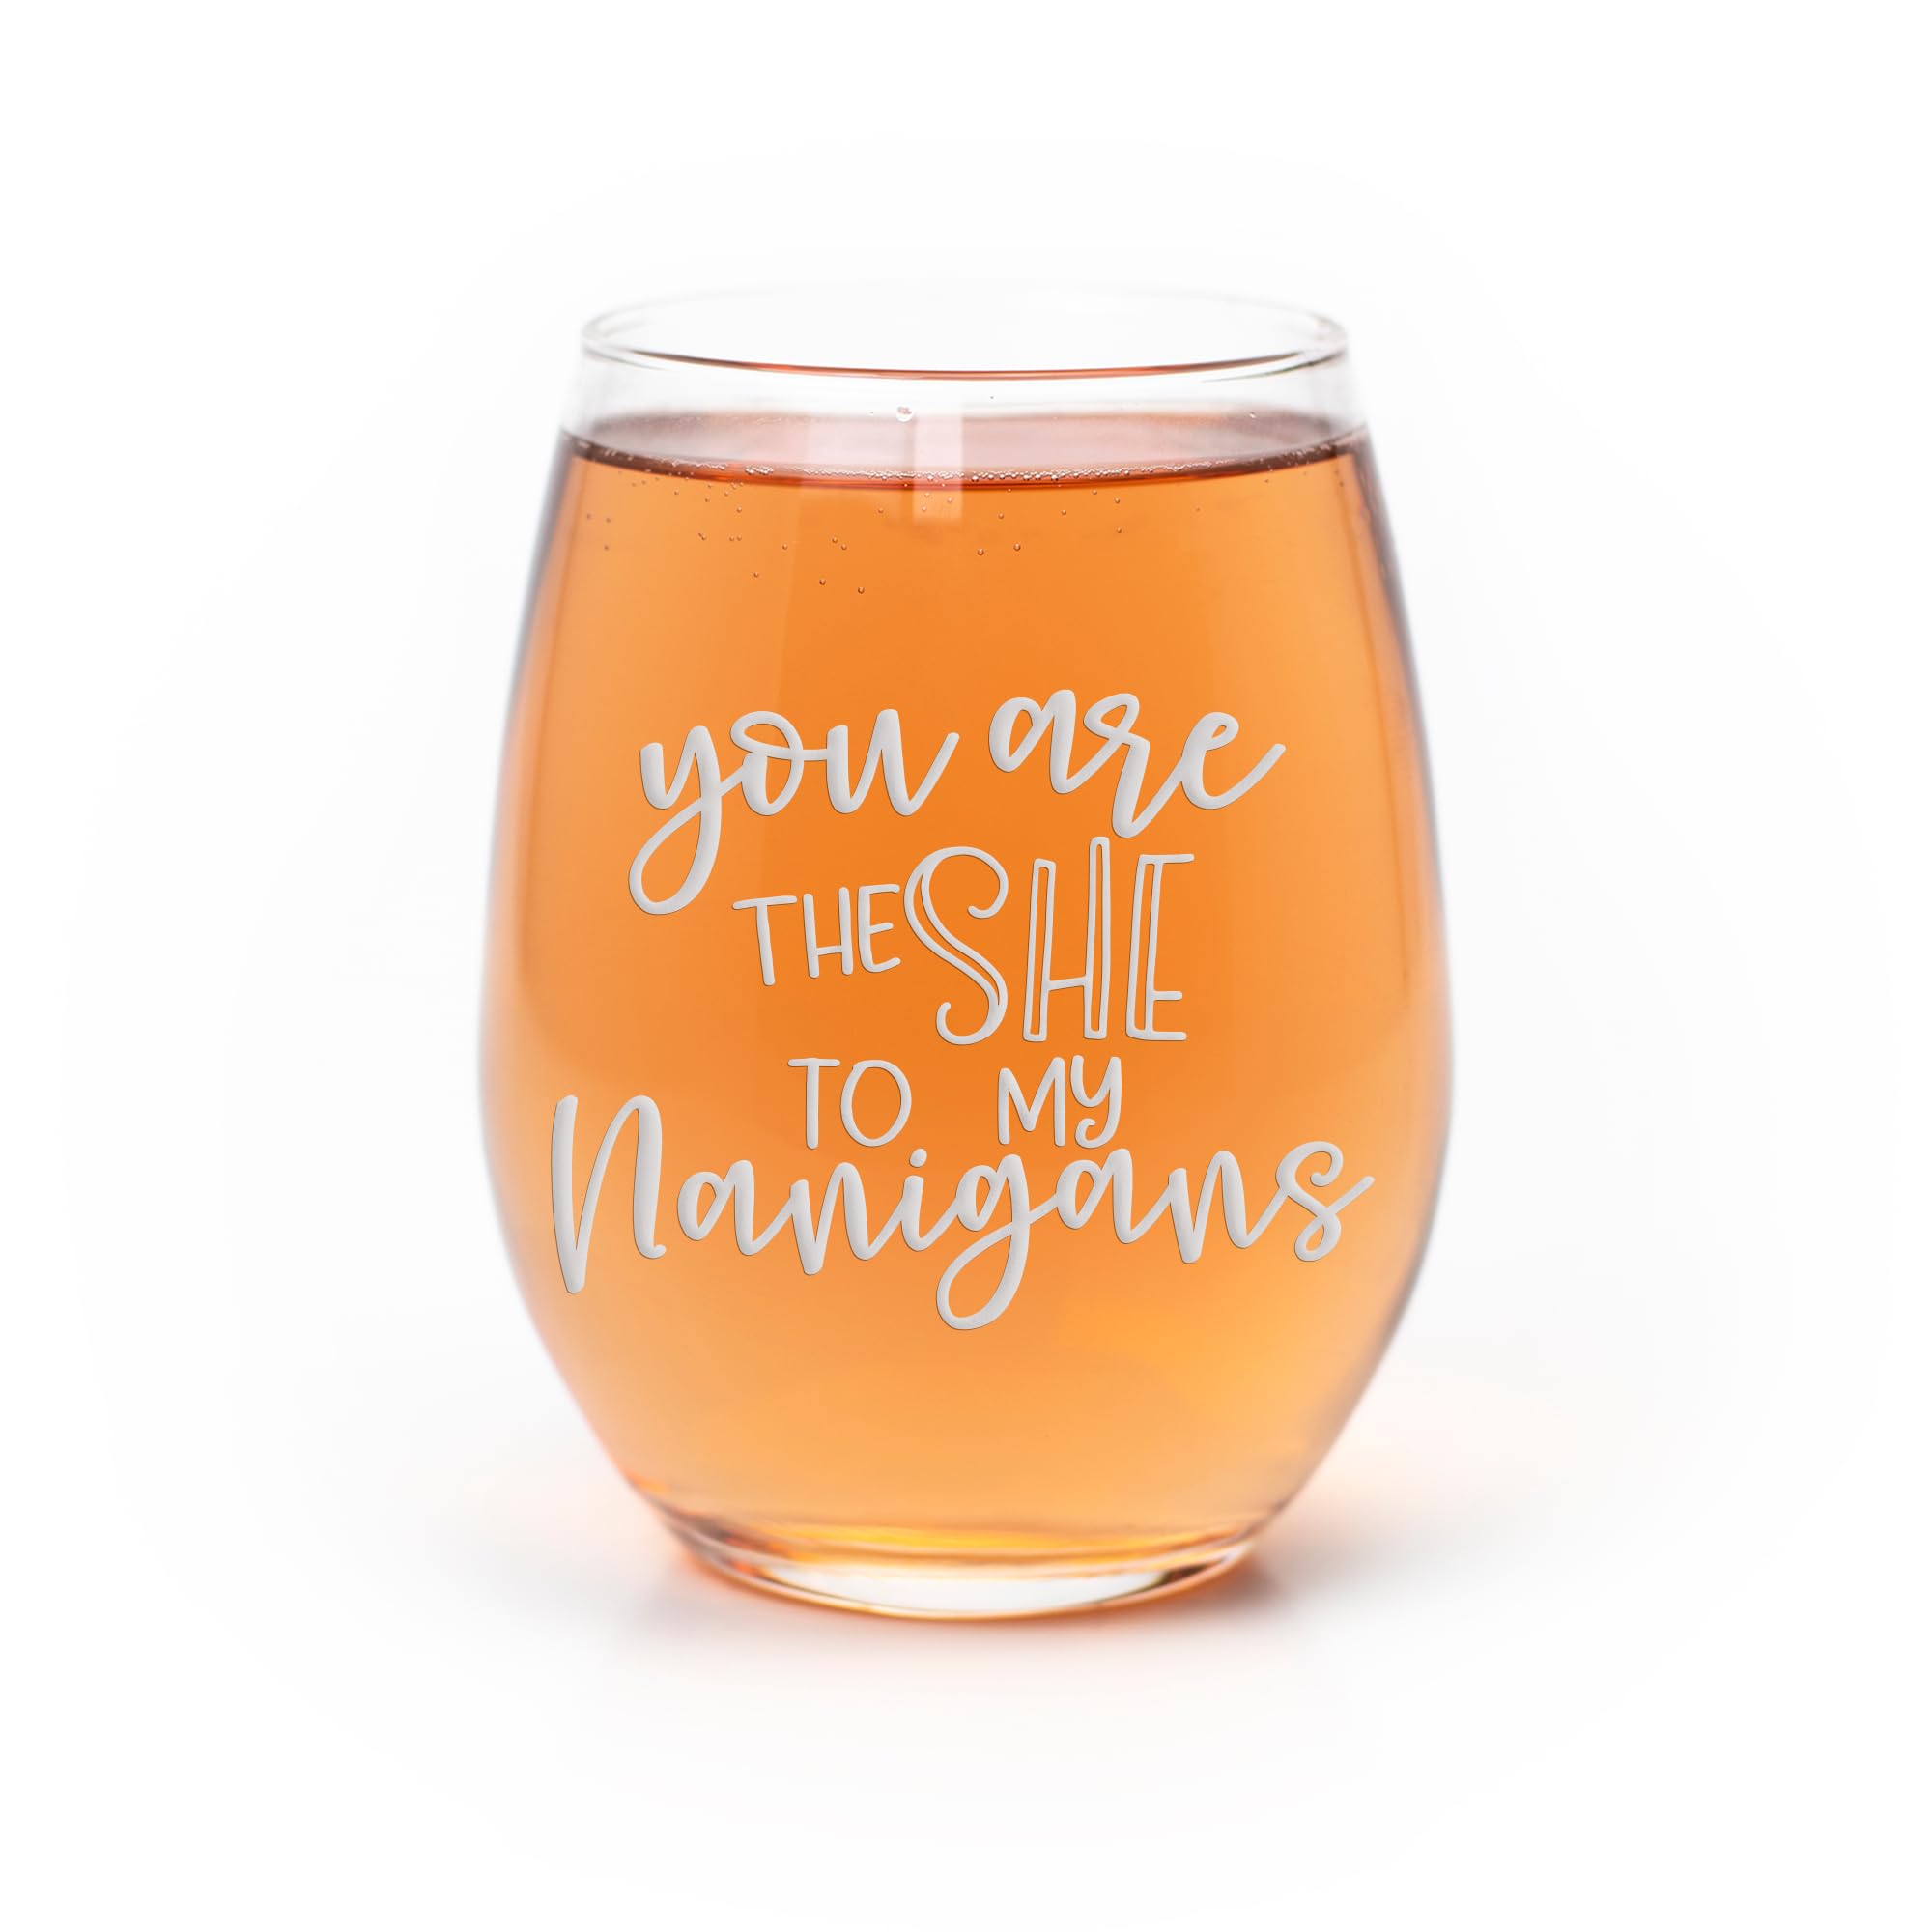 She To My Nanigans Friend Stemless Wine Glass - Friend Gift, Gift for Best Friend, Friends Wine Glass, Funny Gift